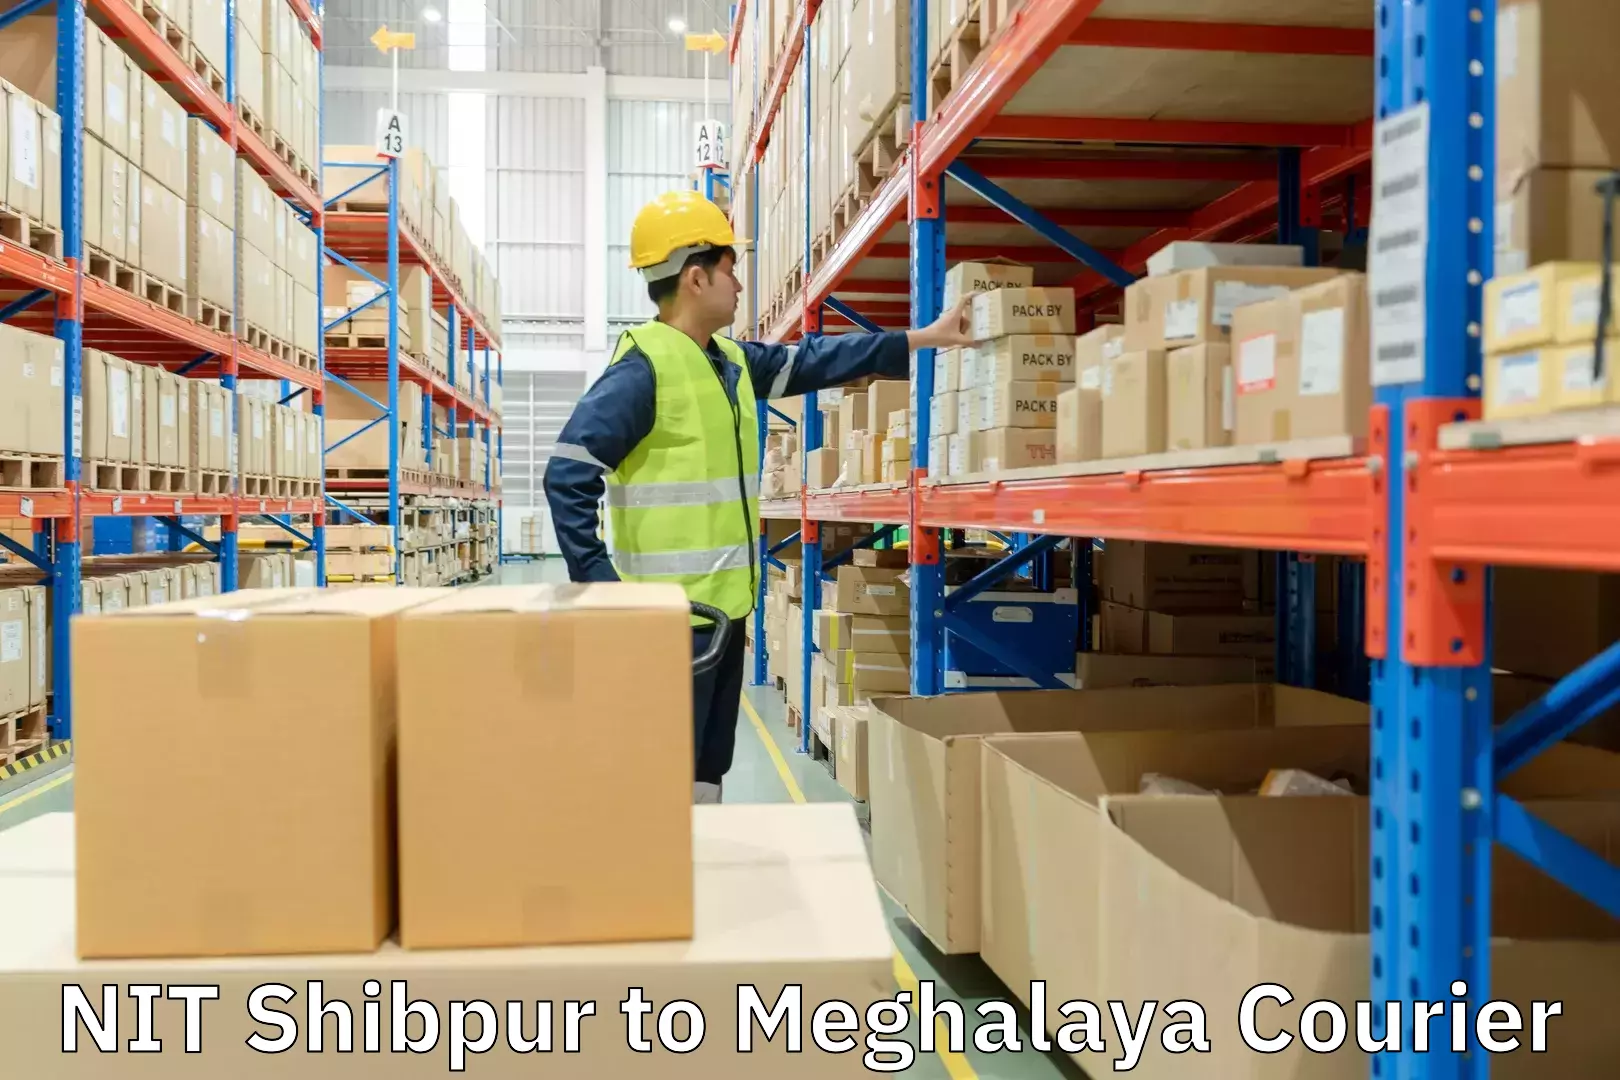 Rural area delivery in NIT Shibpur to Meghalaya